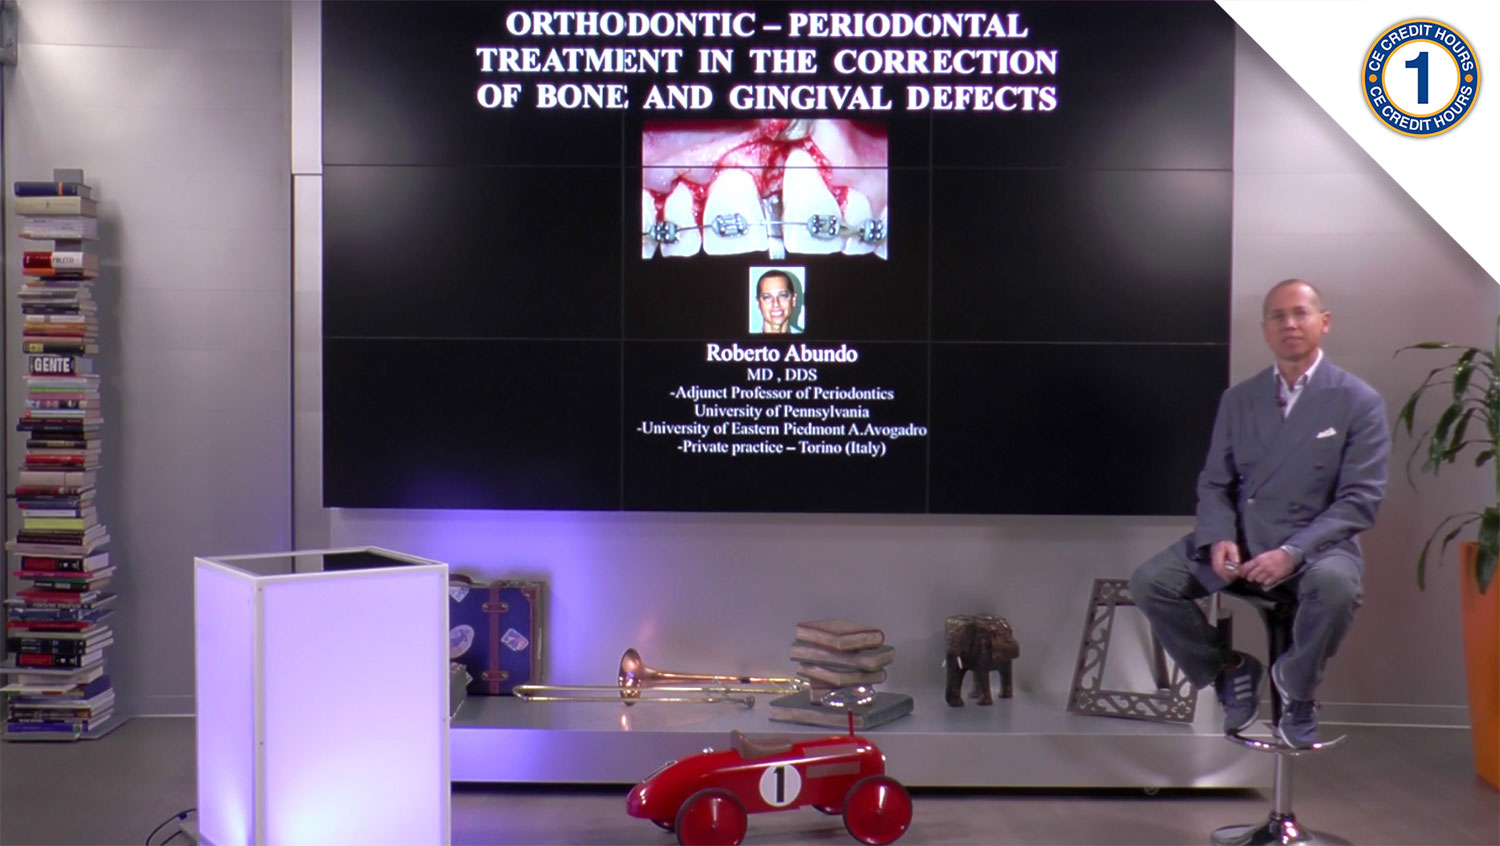 ORTHODONTIC-PERIODONTAL TREATMENT IN THE CORRECTION OF BONE AND GINGIVAL DEFECTS